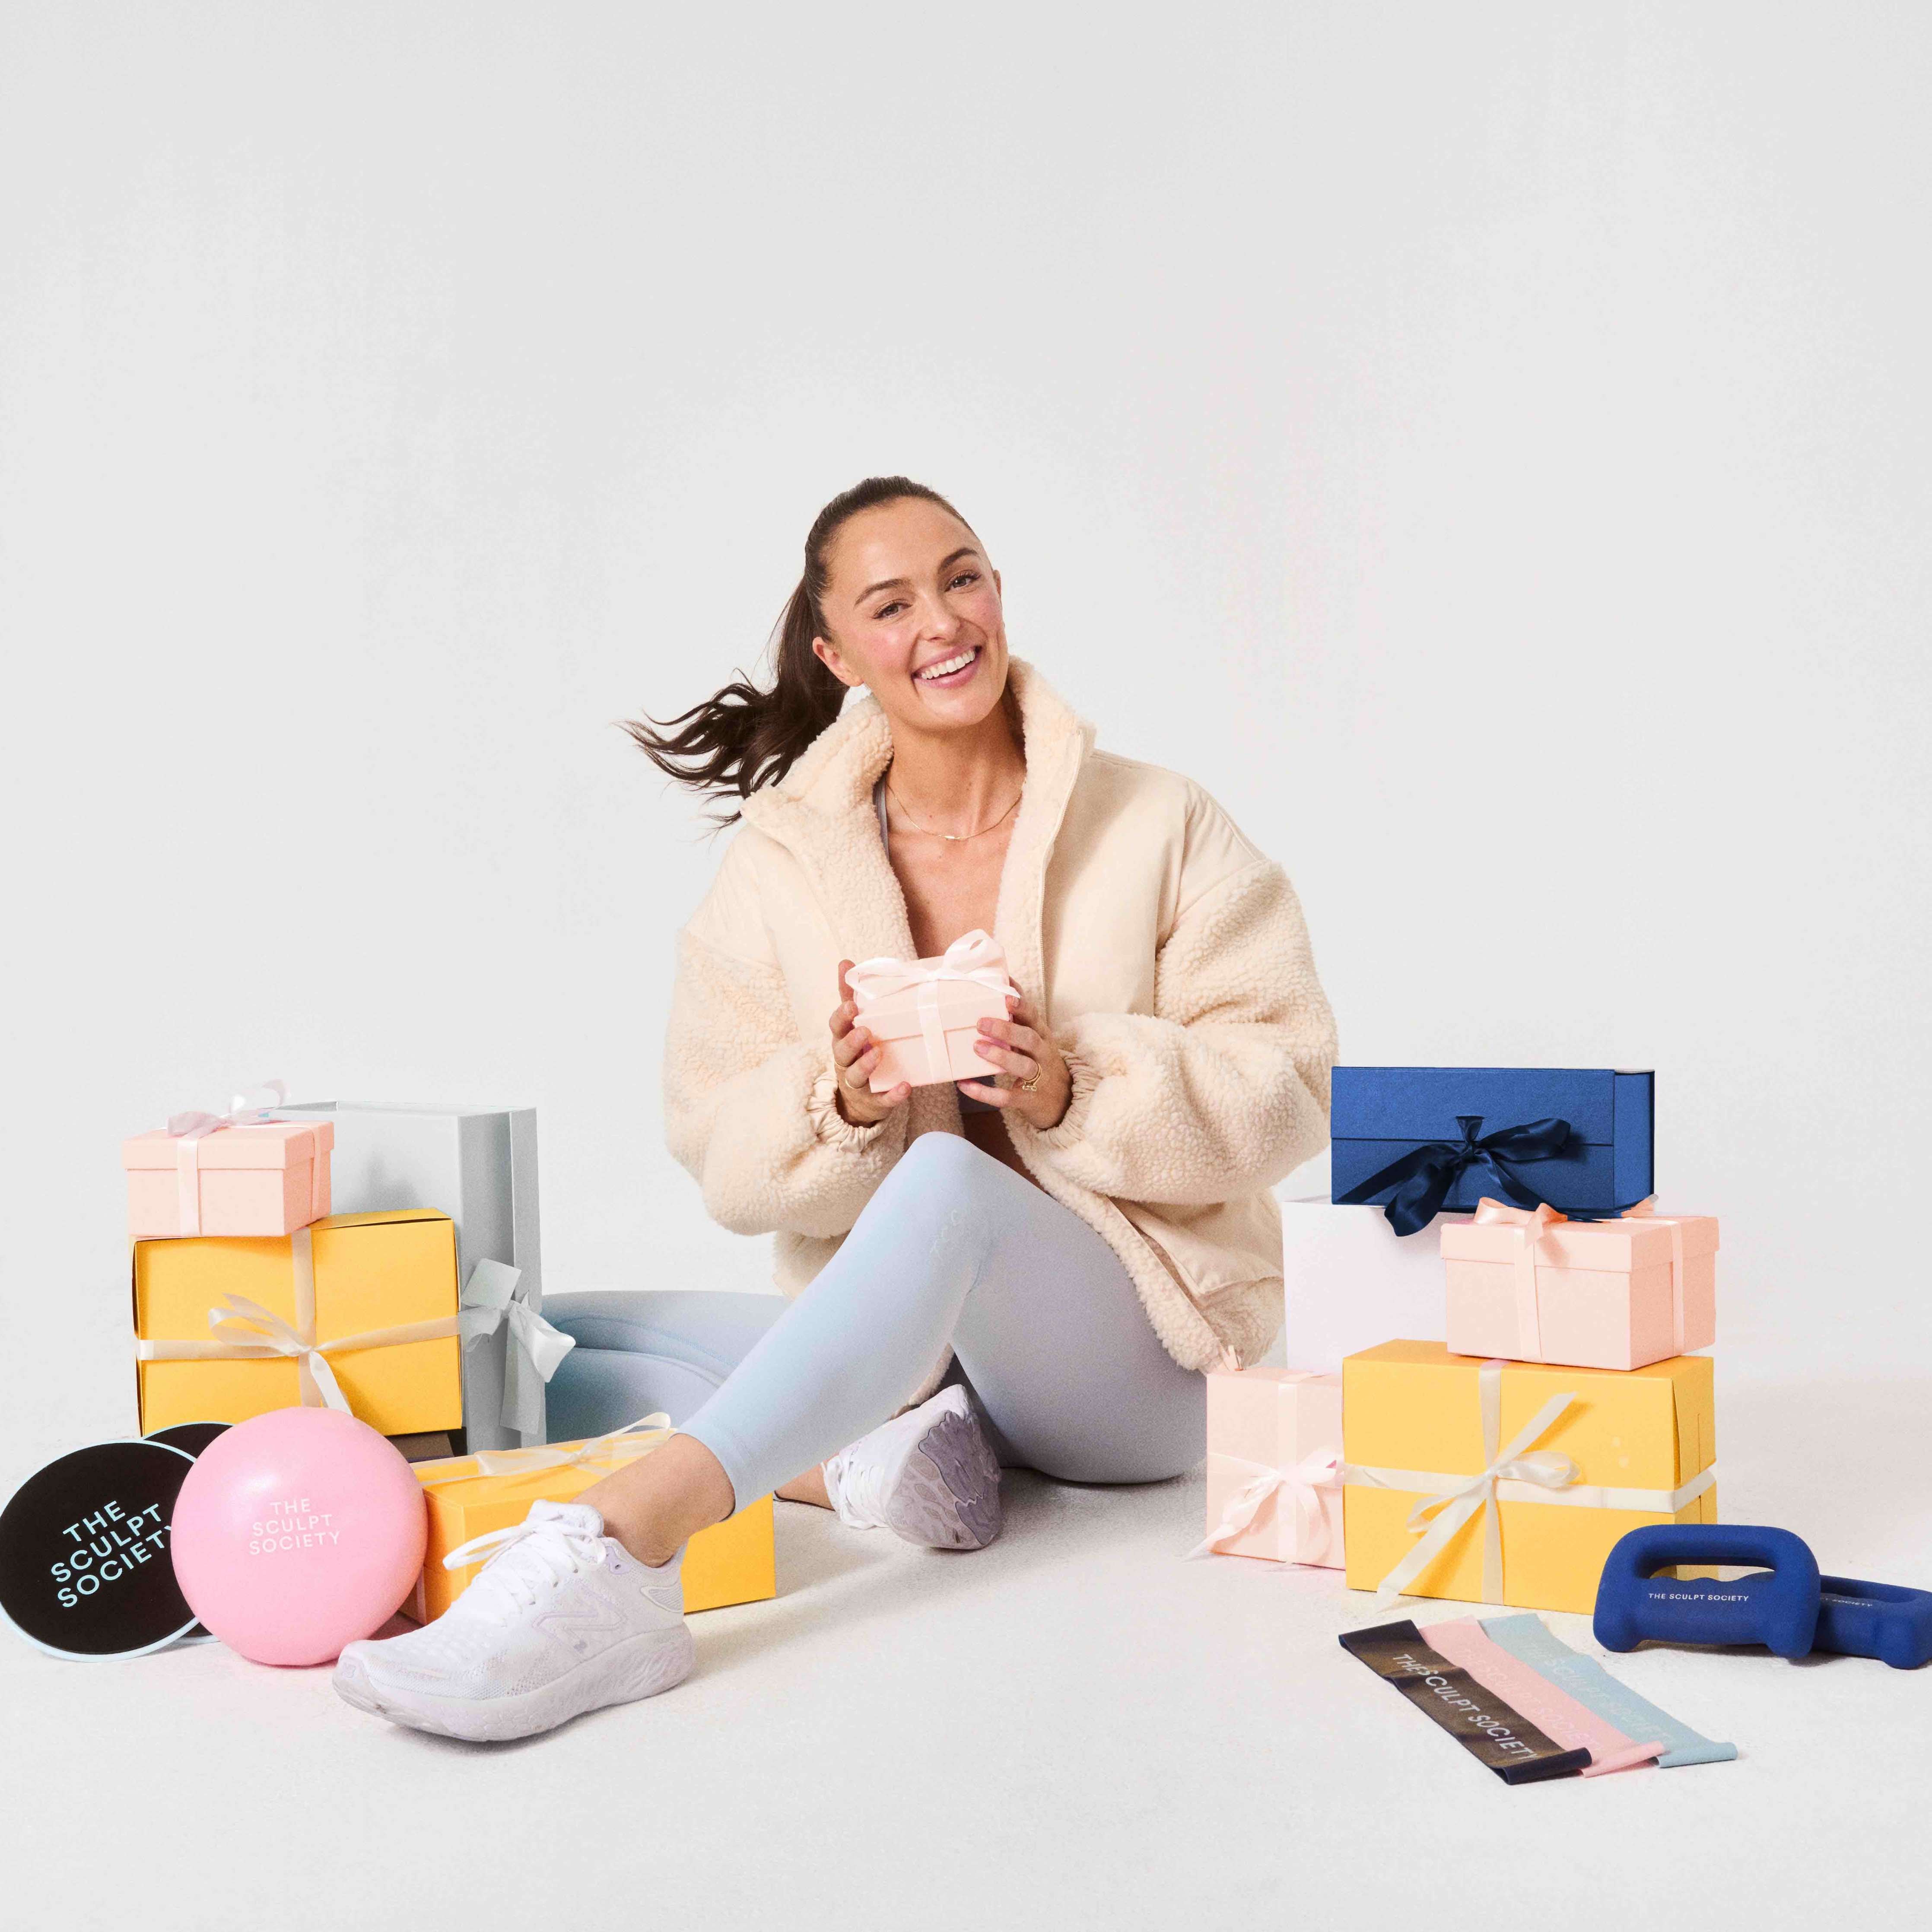 Woman sitting surrounded by gifts